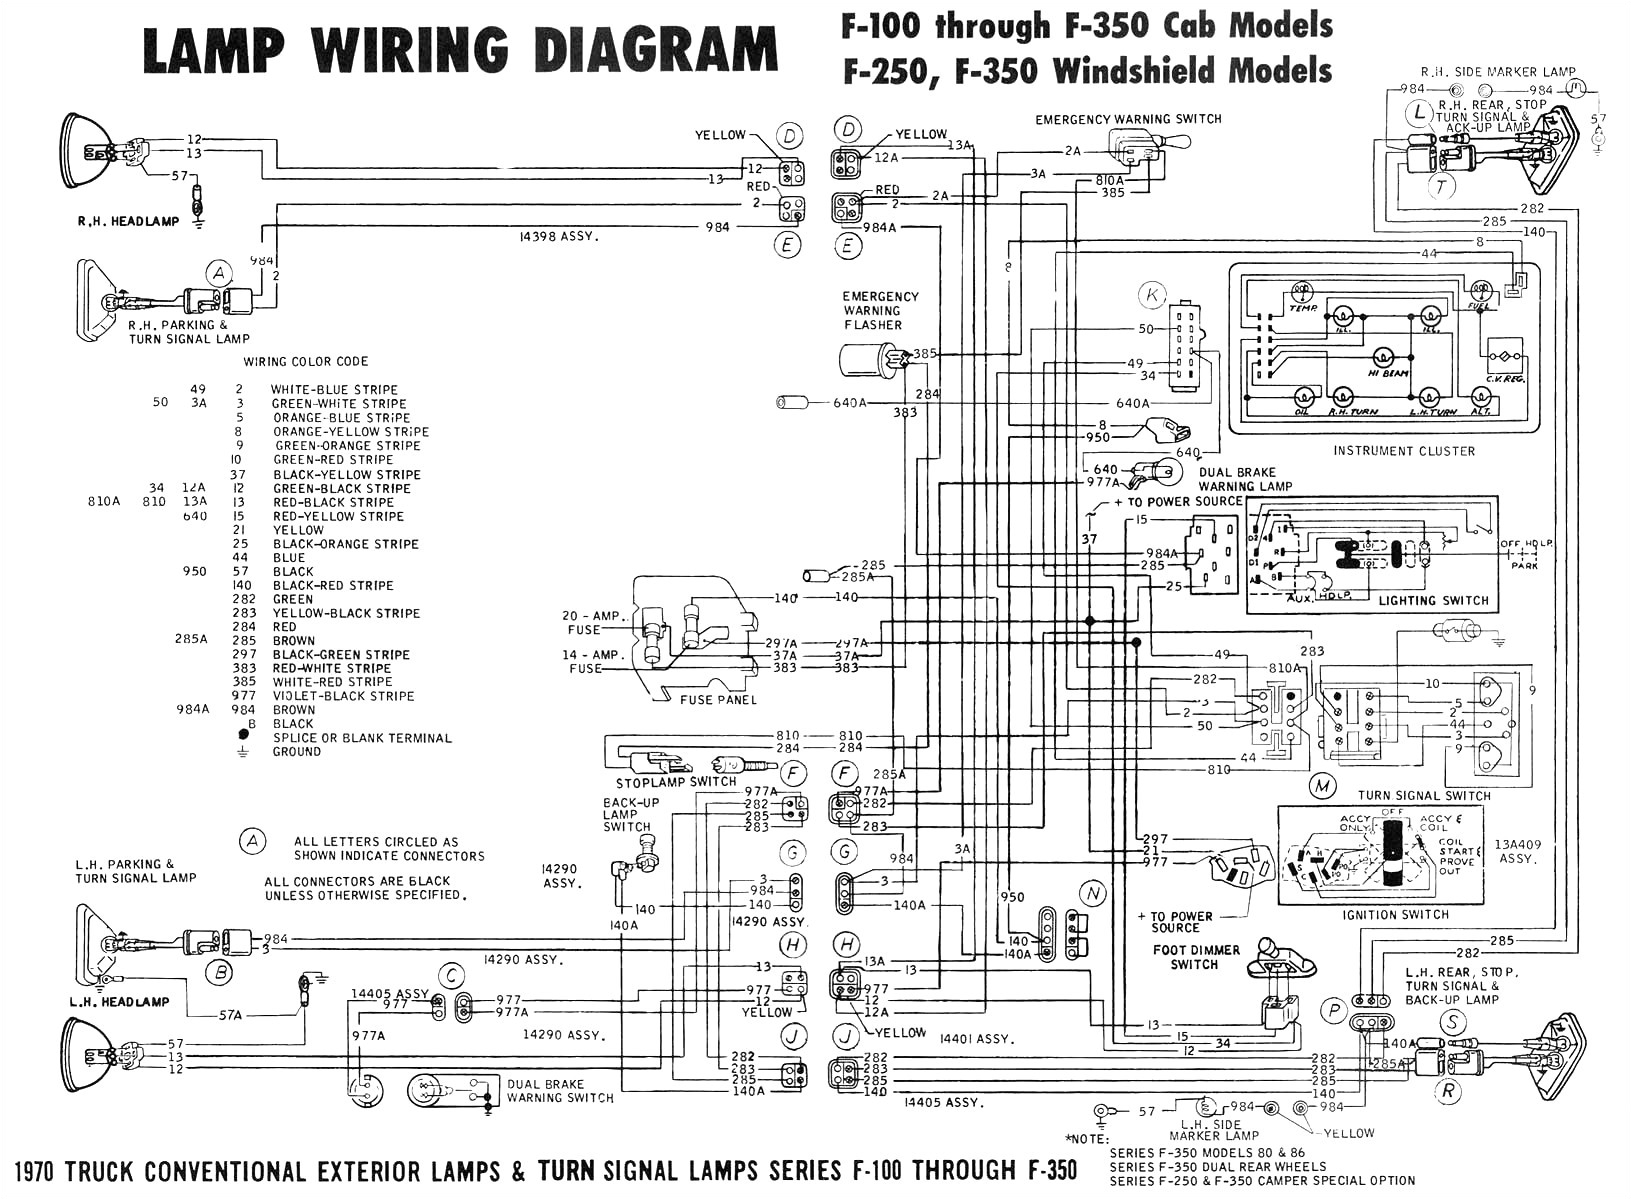 2001 ford excursion wiring diagram free download wiring diagram 2001 ford excursion wiring diagram free download